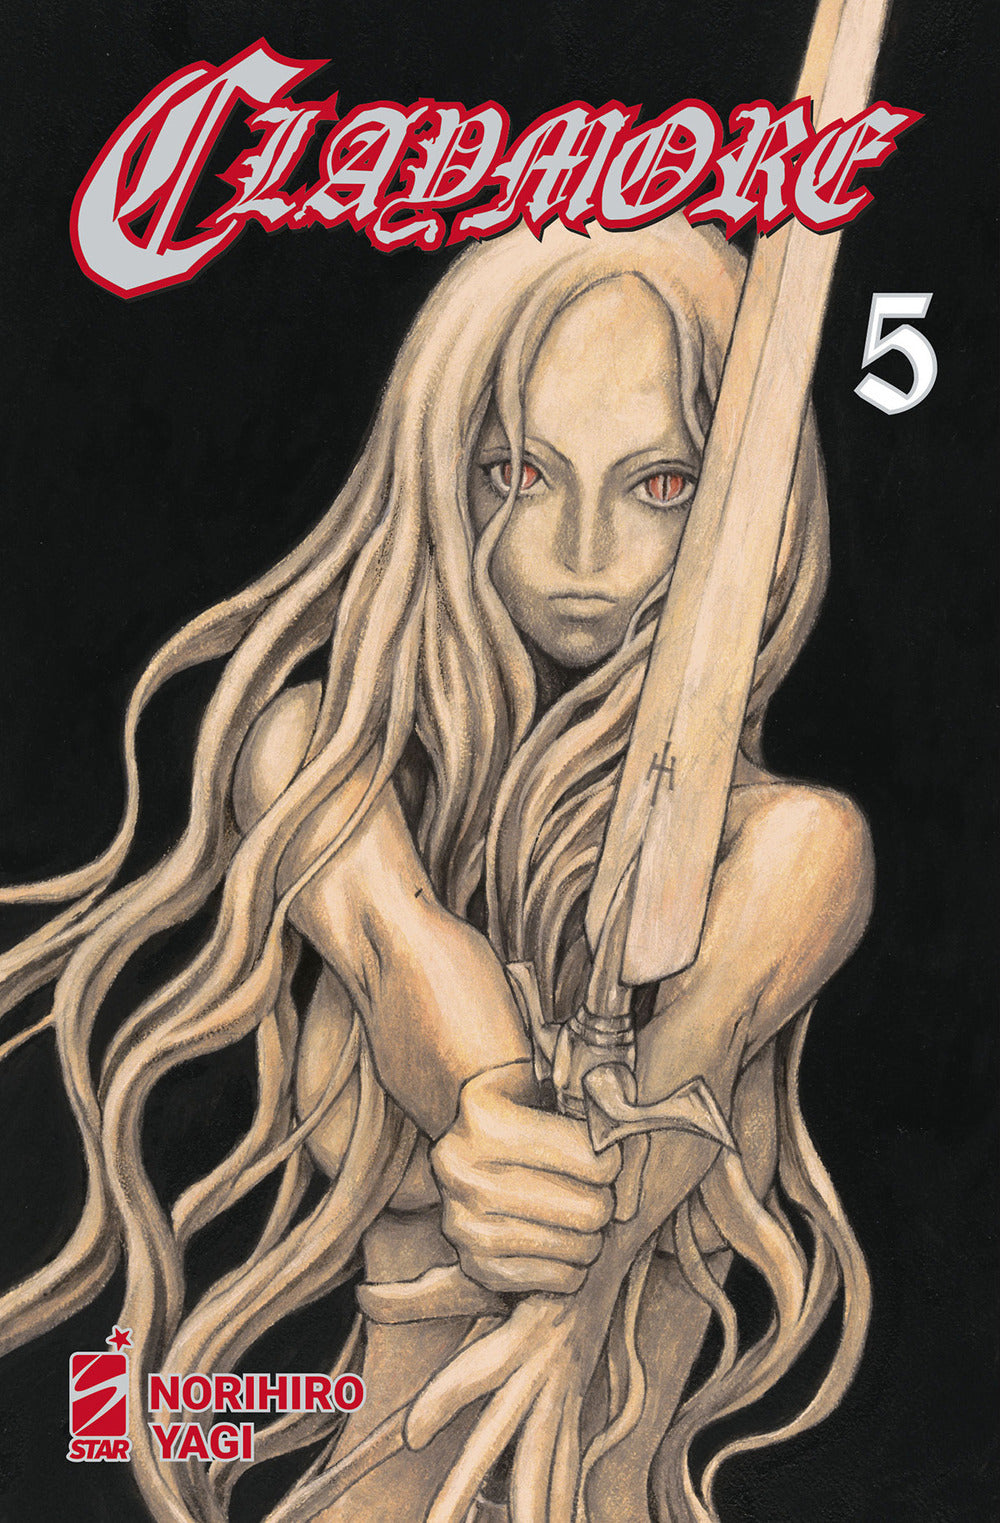 Claymore. New edition. Vol. 5.